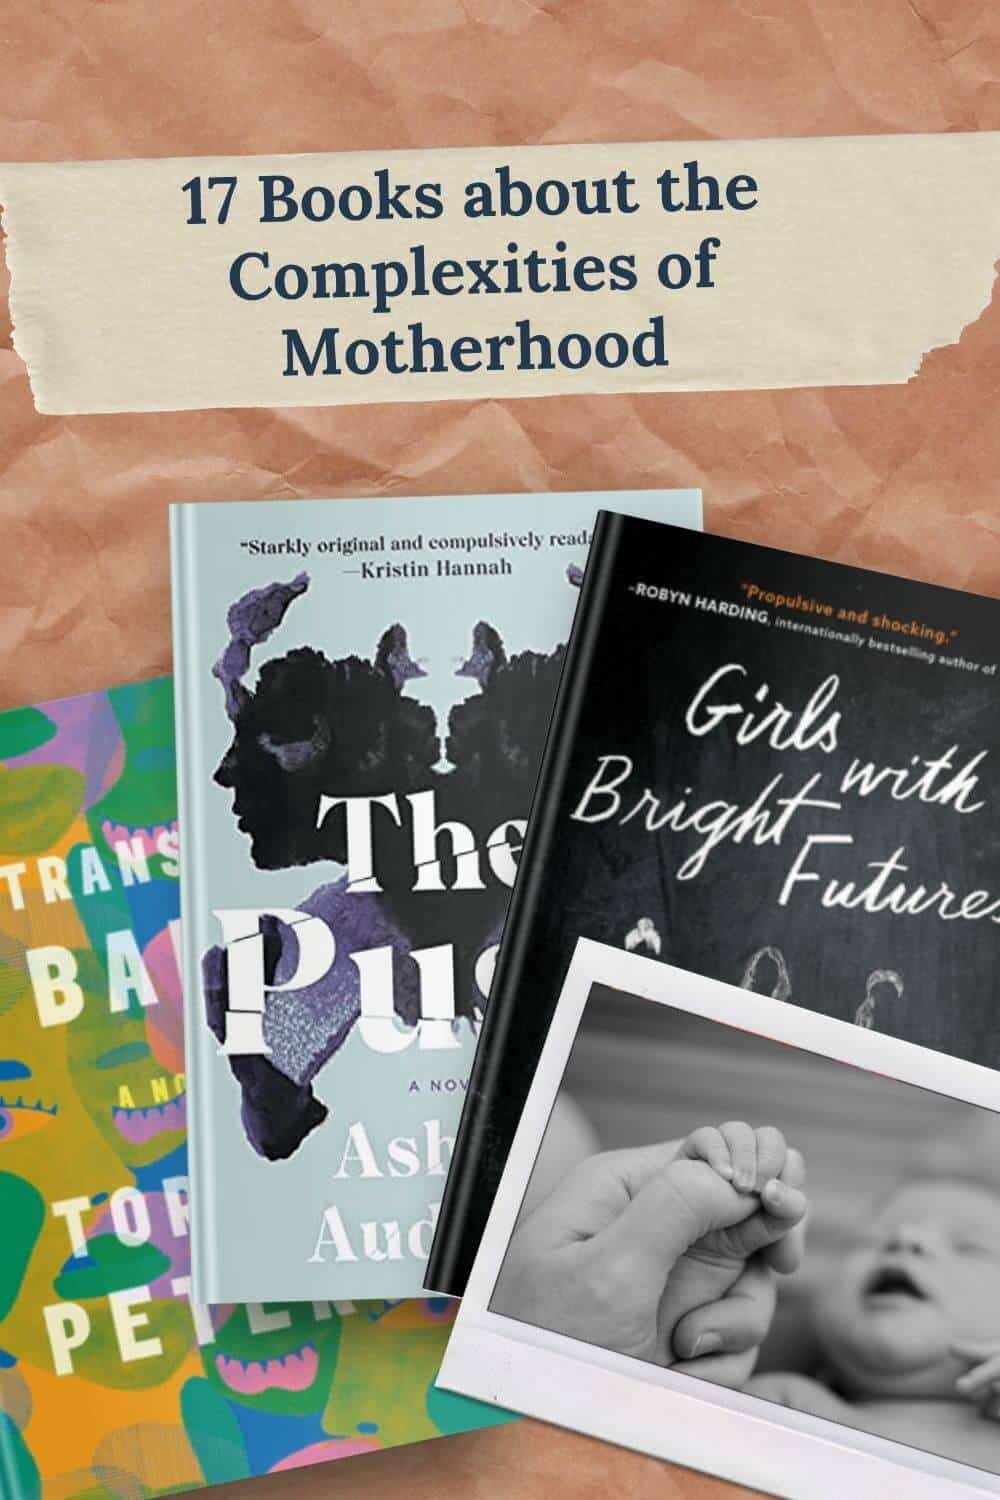 17 Books about the Complexities of Motherhood